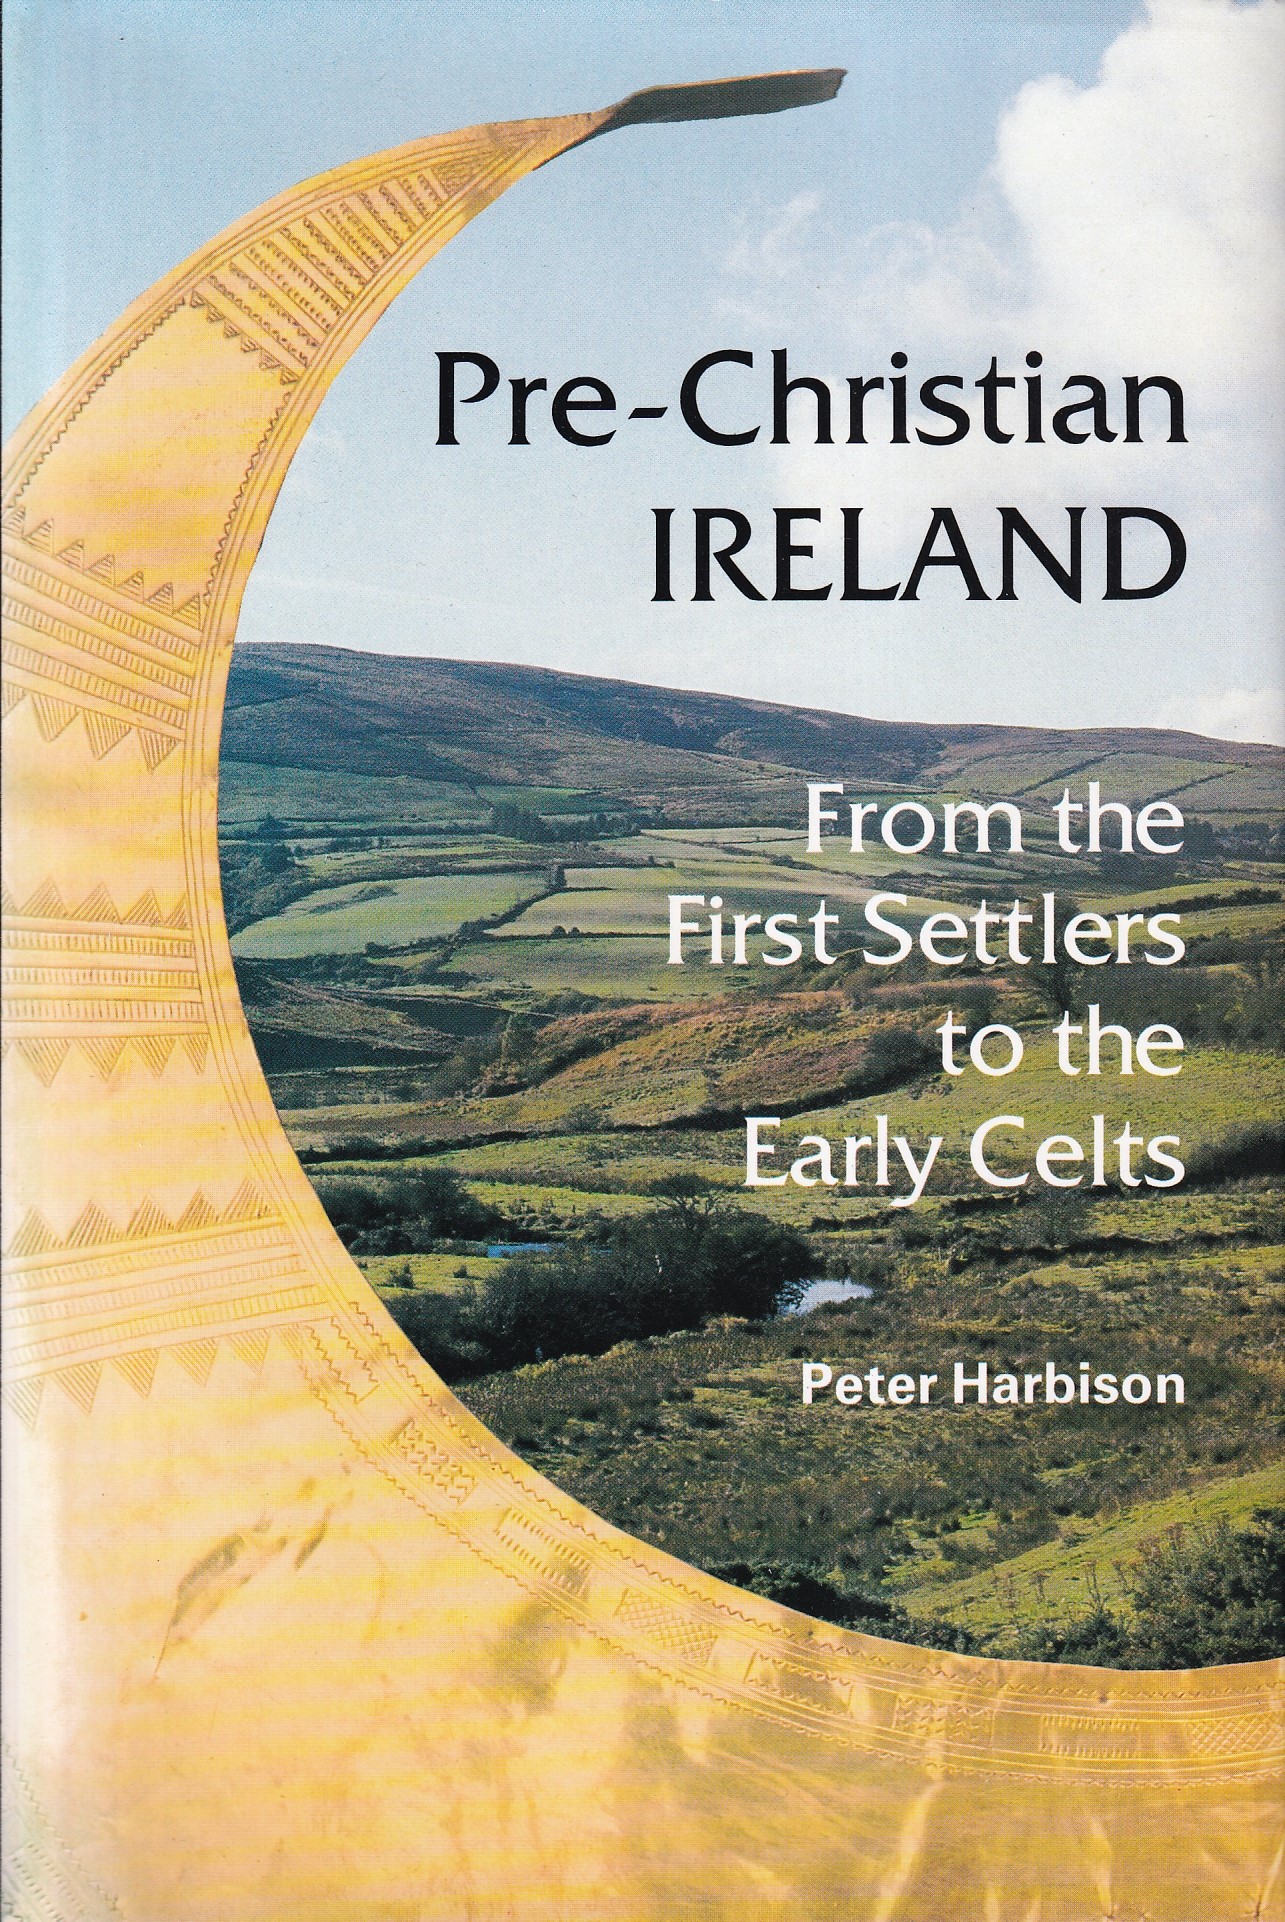 Pre-Christian Ireland: From the First Settlers to the Early Celts | Peter Harbison | Charlie Byrne's